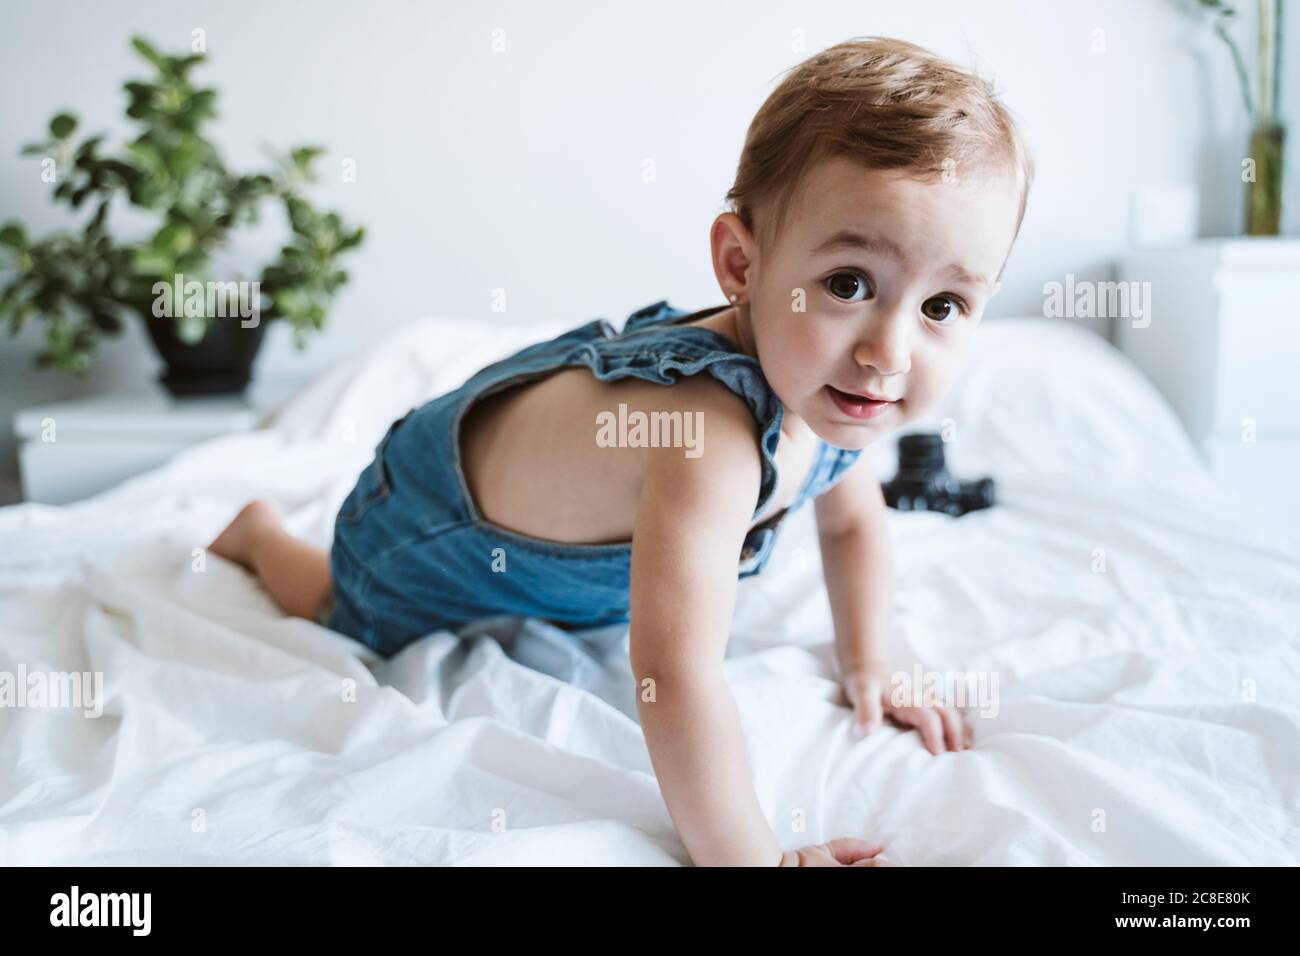 Baby girl crawling on bed Stock Photo